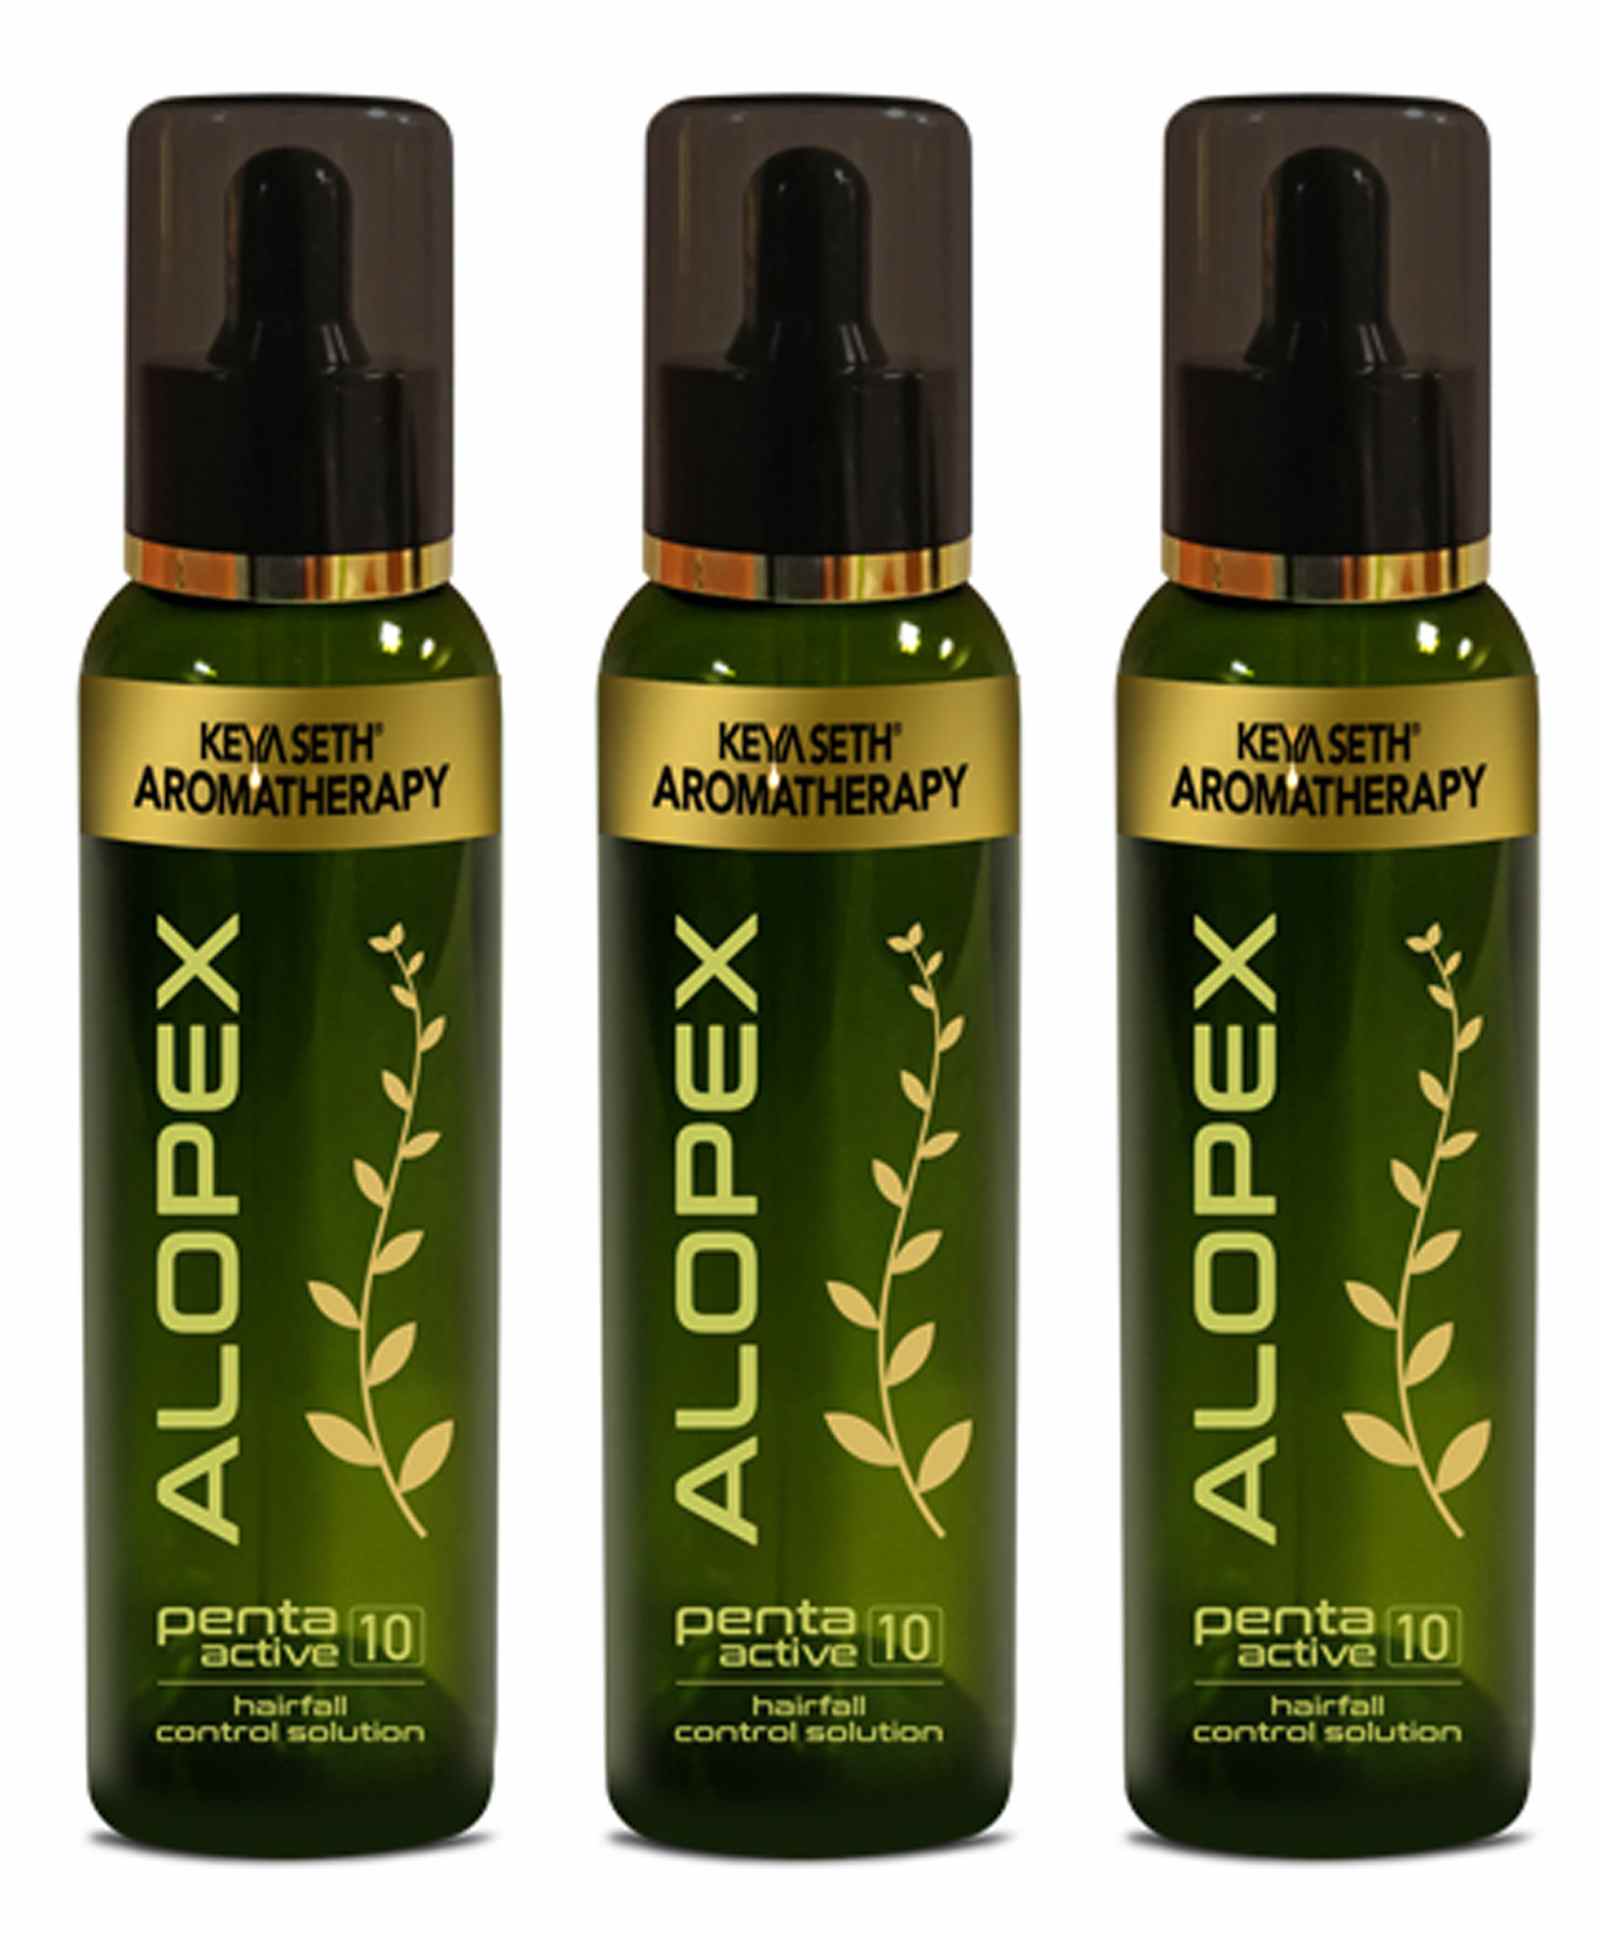 Keya Seth Aromatherapy Alopex Penta Active 10 Hairfall Control Solution  Pack of 3 - 120 ml each Online in India, Buy at Best Price from   - 9276974